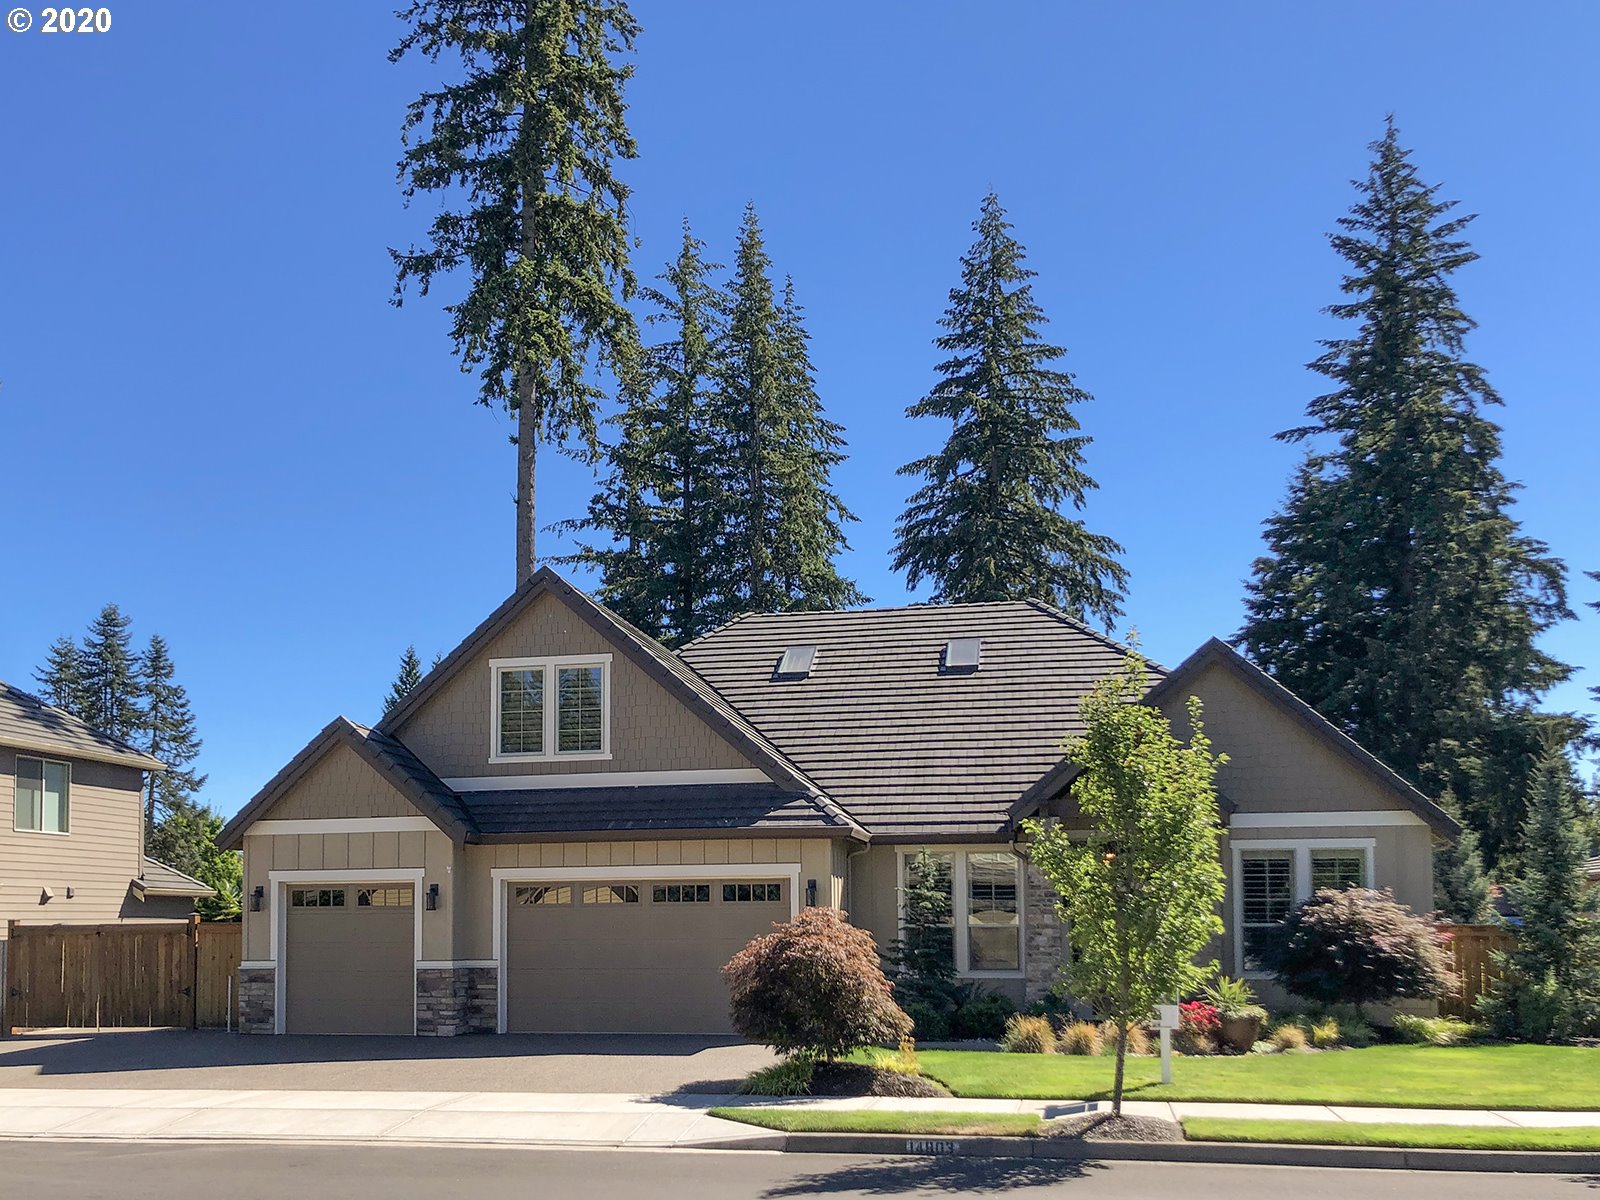 Vancouver, WA real estate - 1478 Listings found | Rose ...